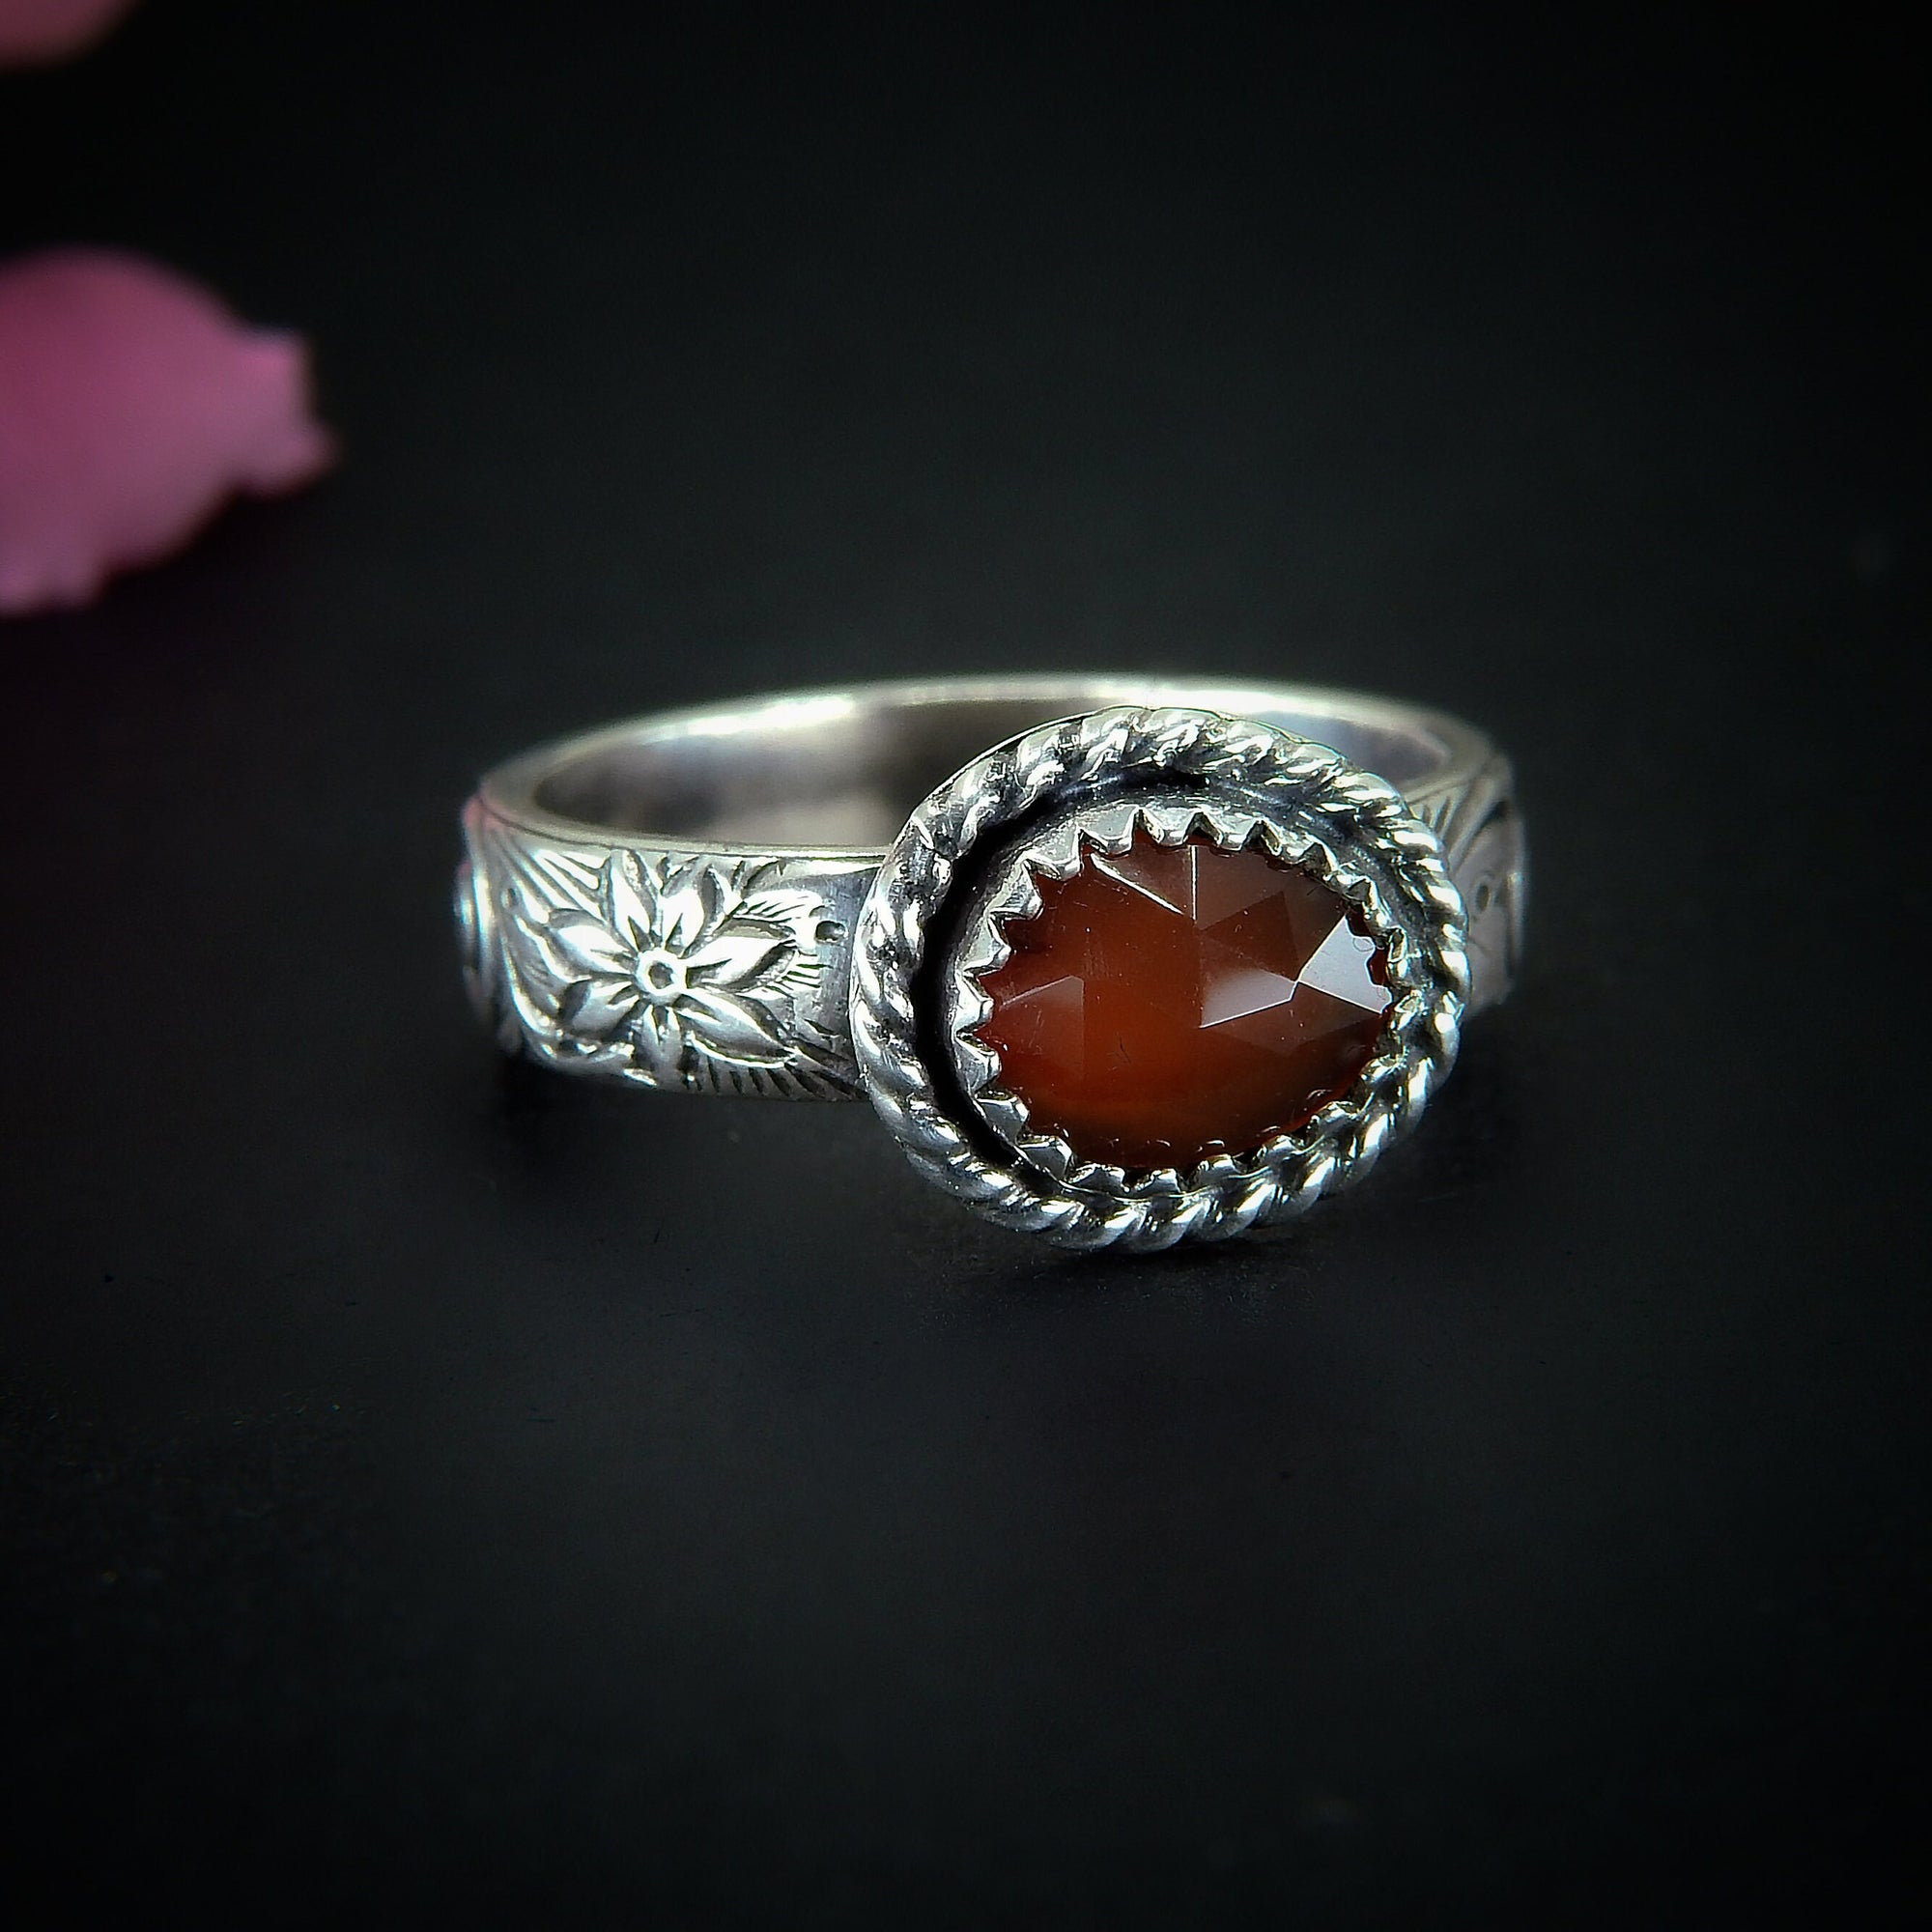 Rose Cut Carnelian Ring - Size 8 1/2 - Sterling Silver - Orange Carnelian Jewelry - Faceted Carnelian Jewellery - Red Carnelian Thick Band